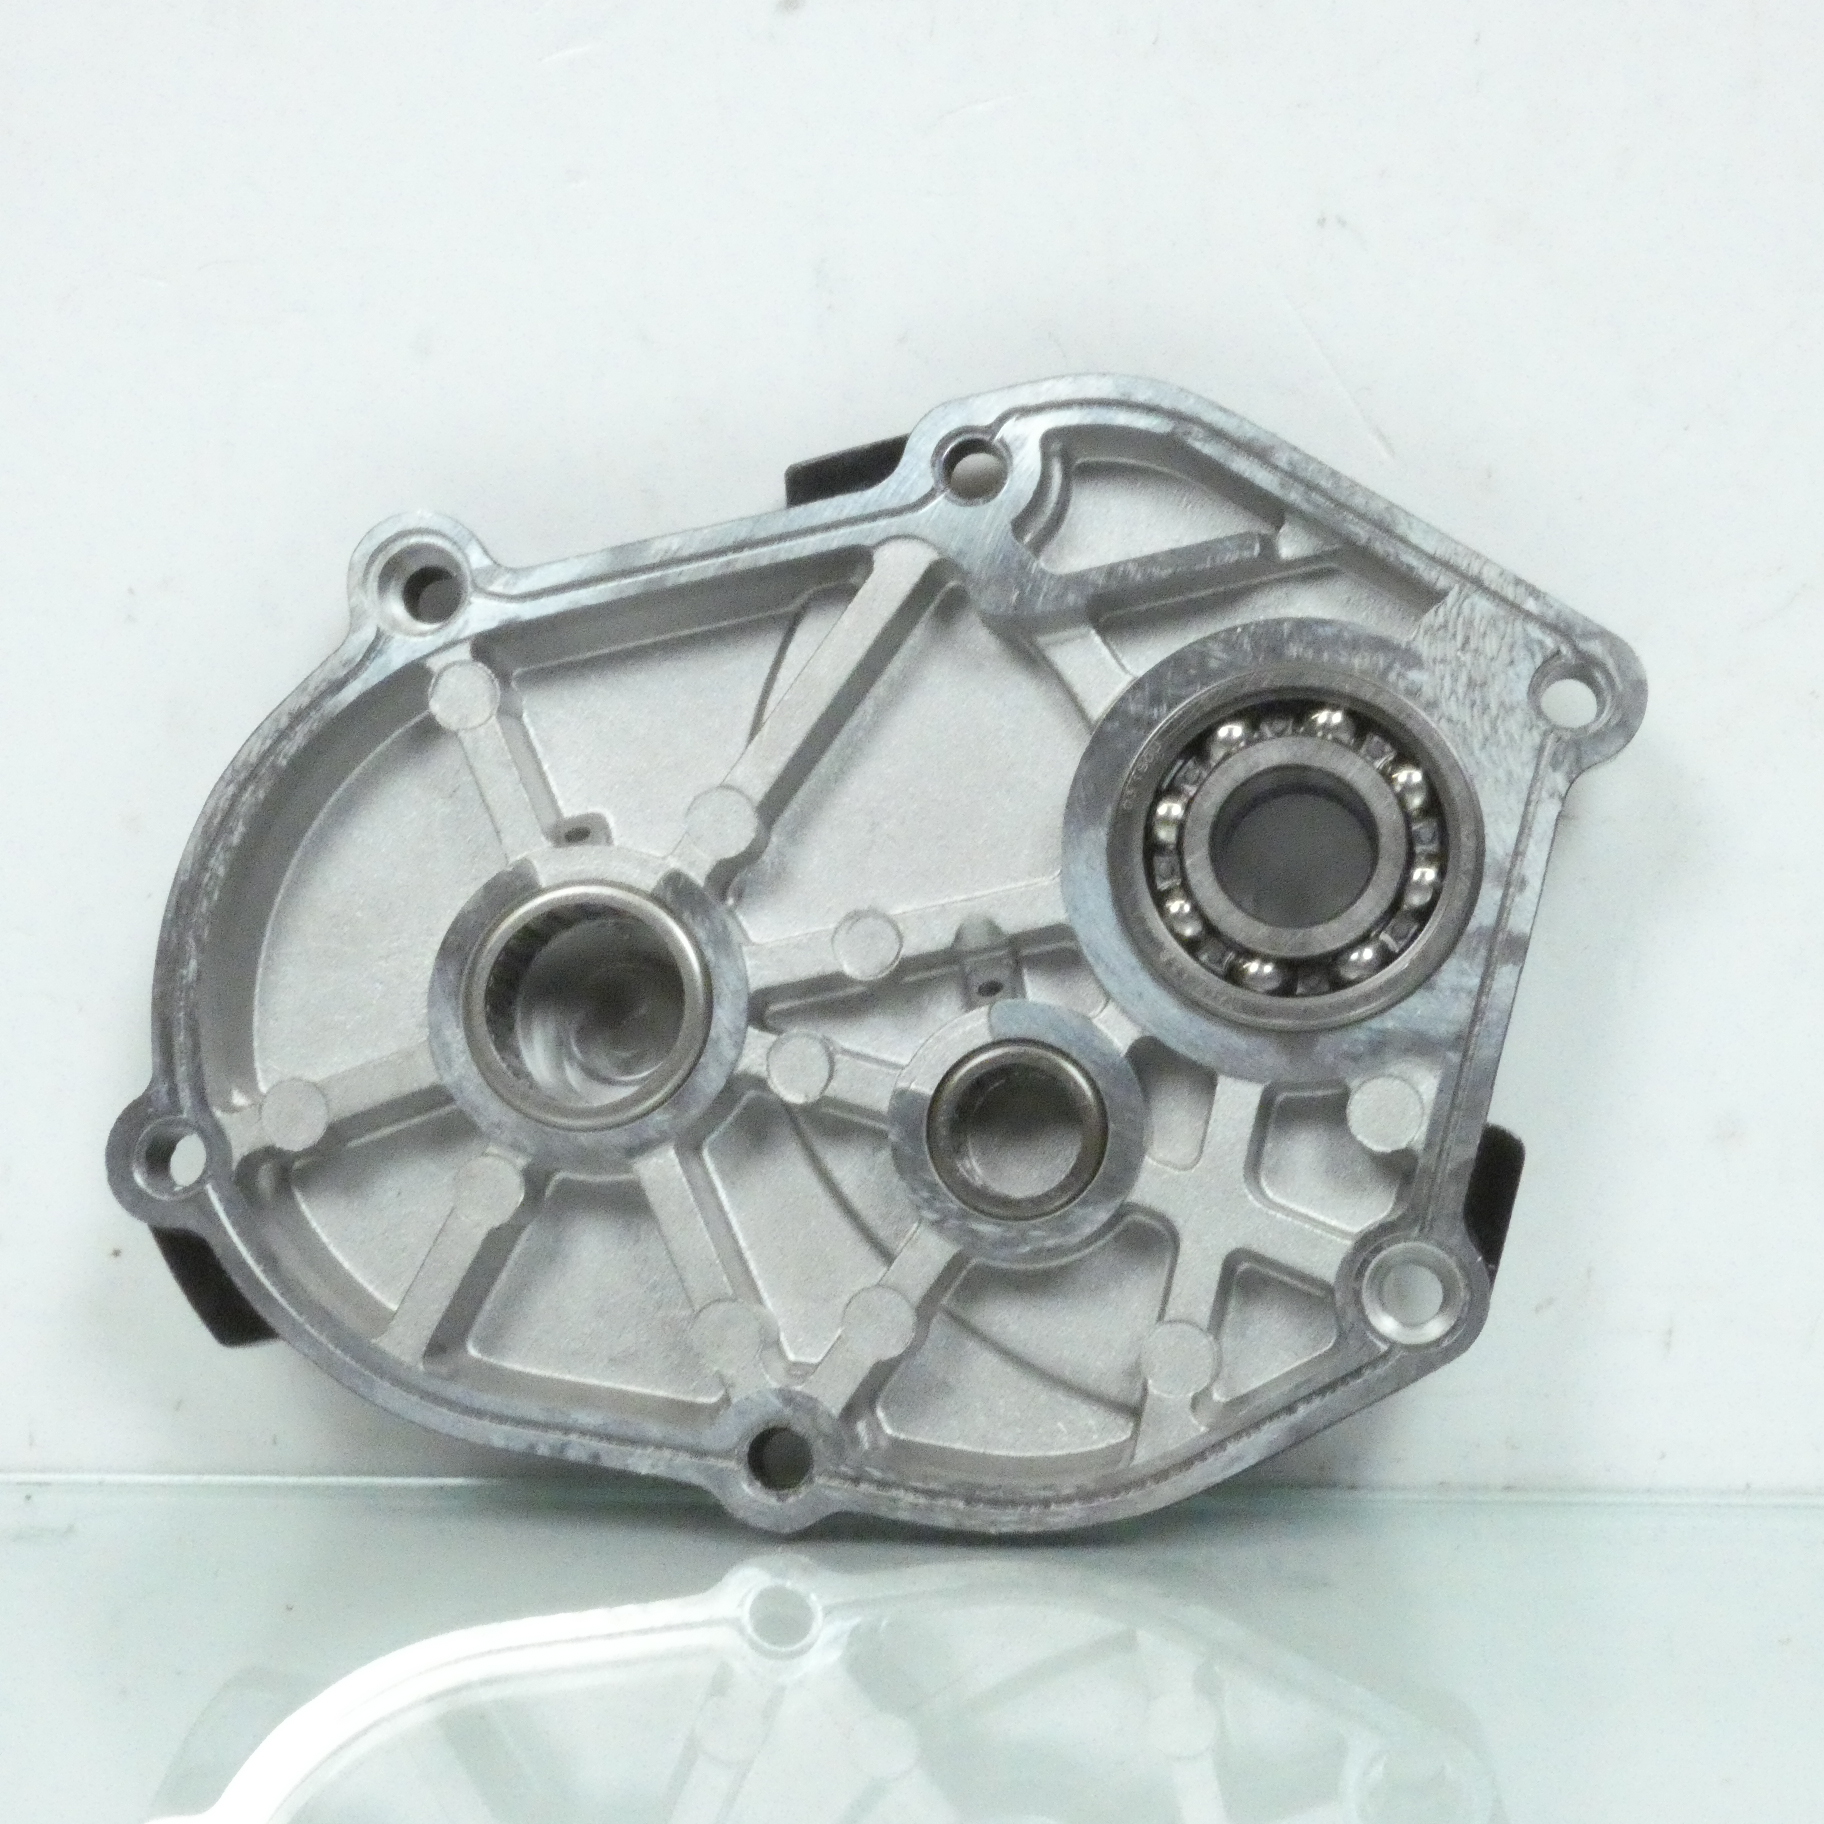 Carter de transmission Polini pour Scooter Yamaha 50 Neos 2T Neuf